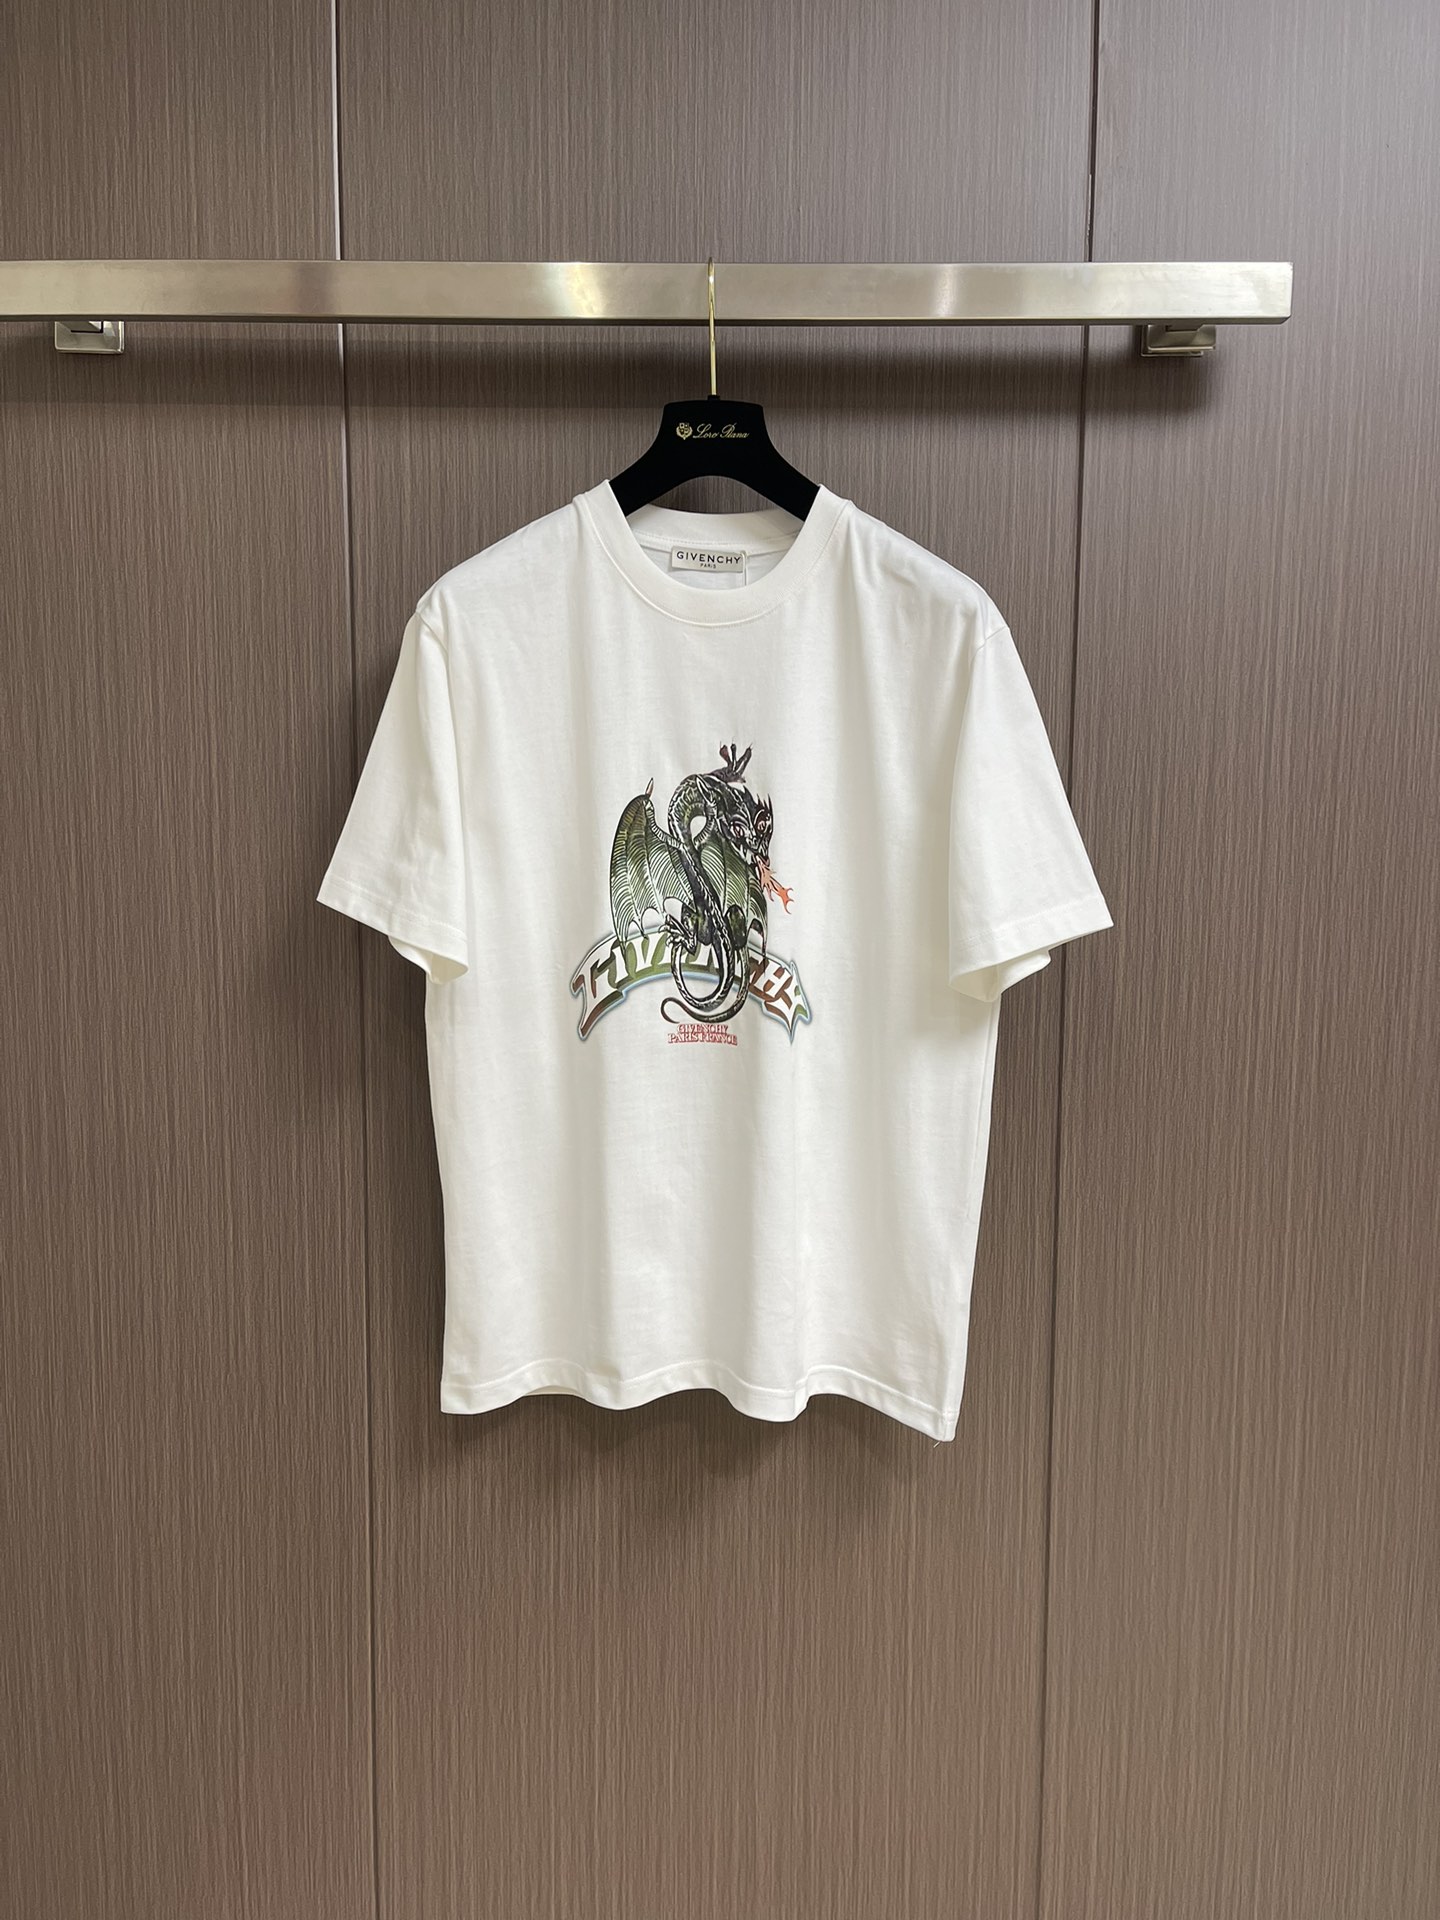 Buy
 Givenchy Clothing T-Shirt First Top
 Embroidery Unisex Cotton Spring/Summer Collection Short Sleeve